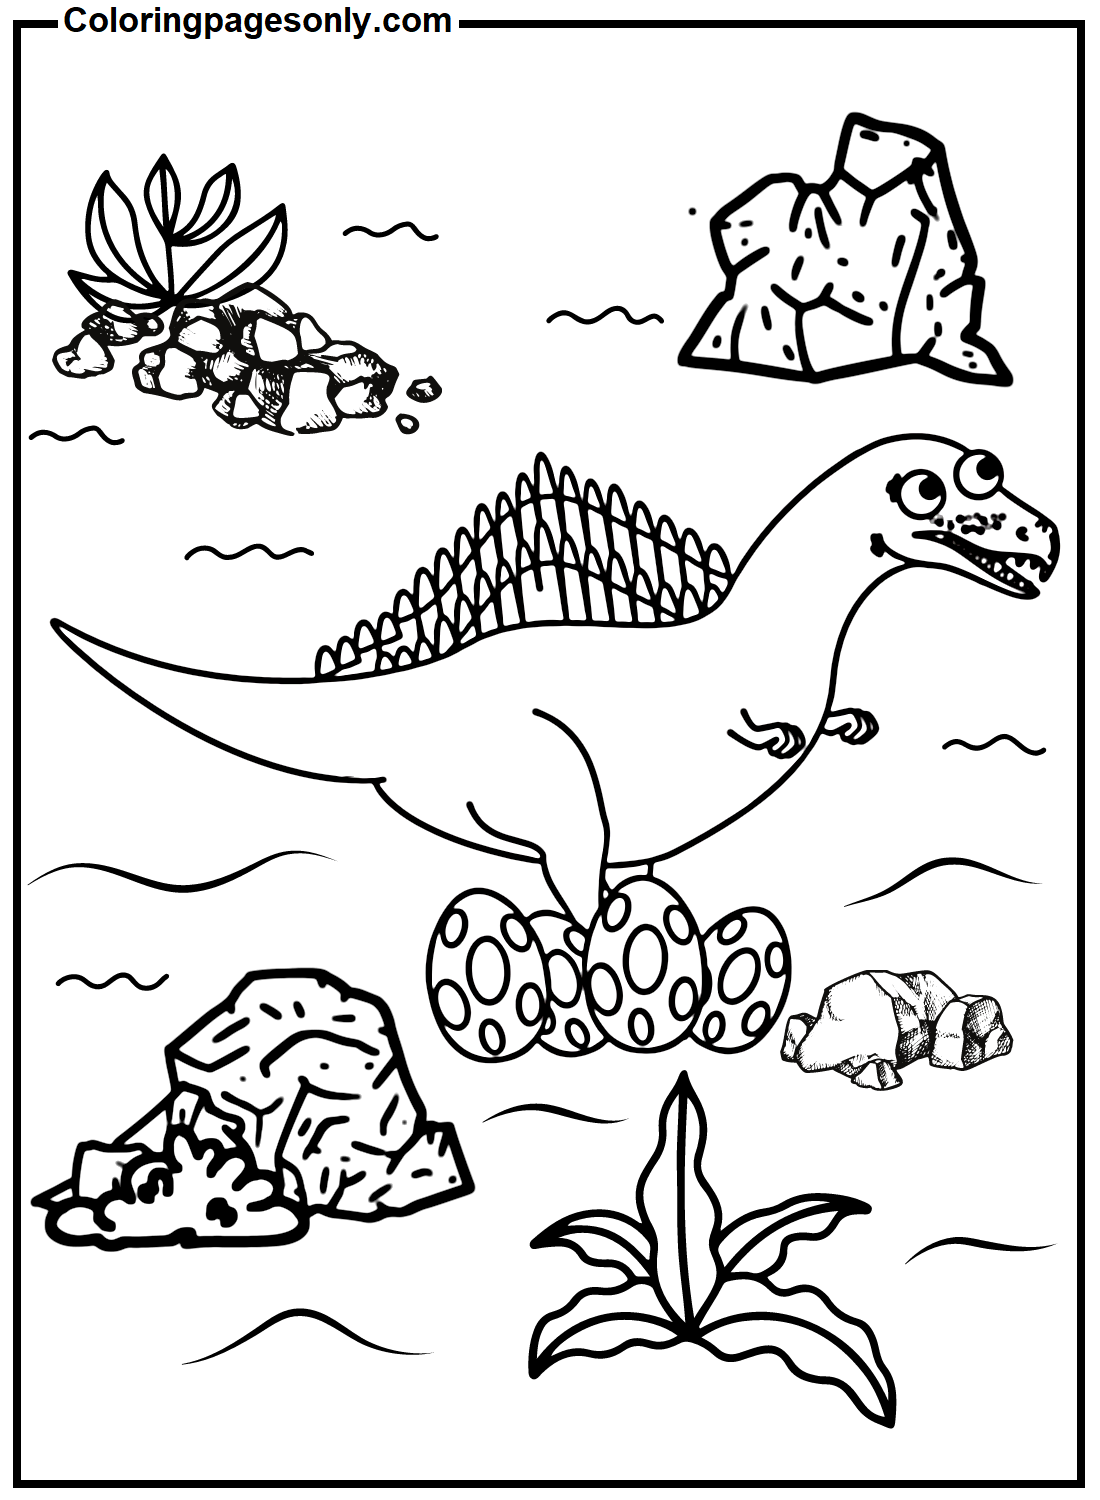 Spinosaurus with Eggs Coloring Pages